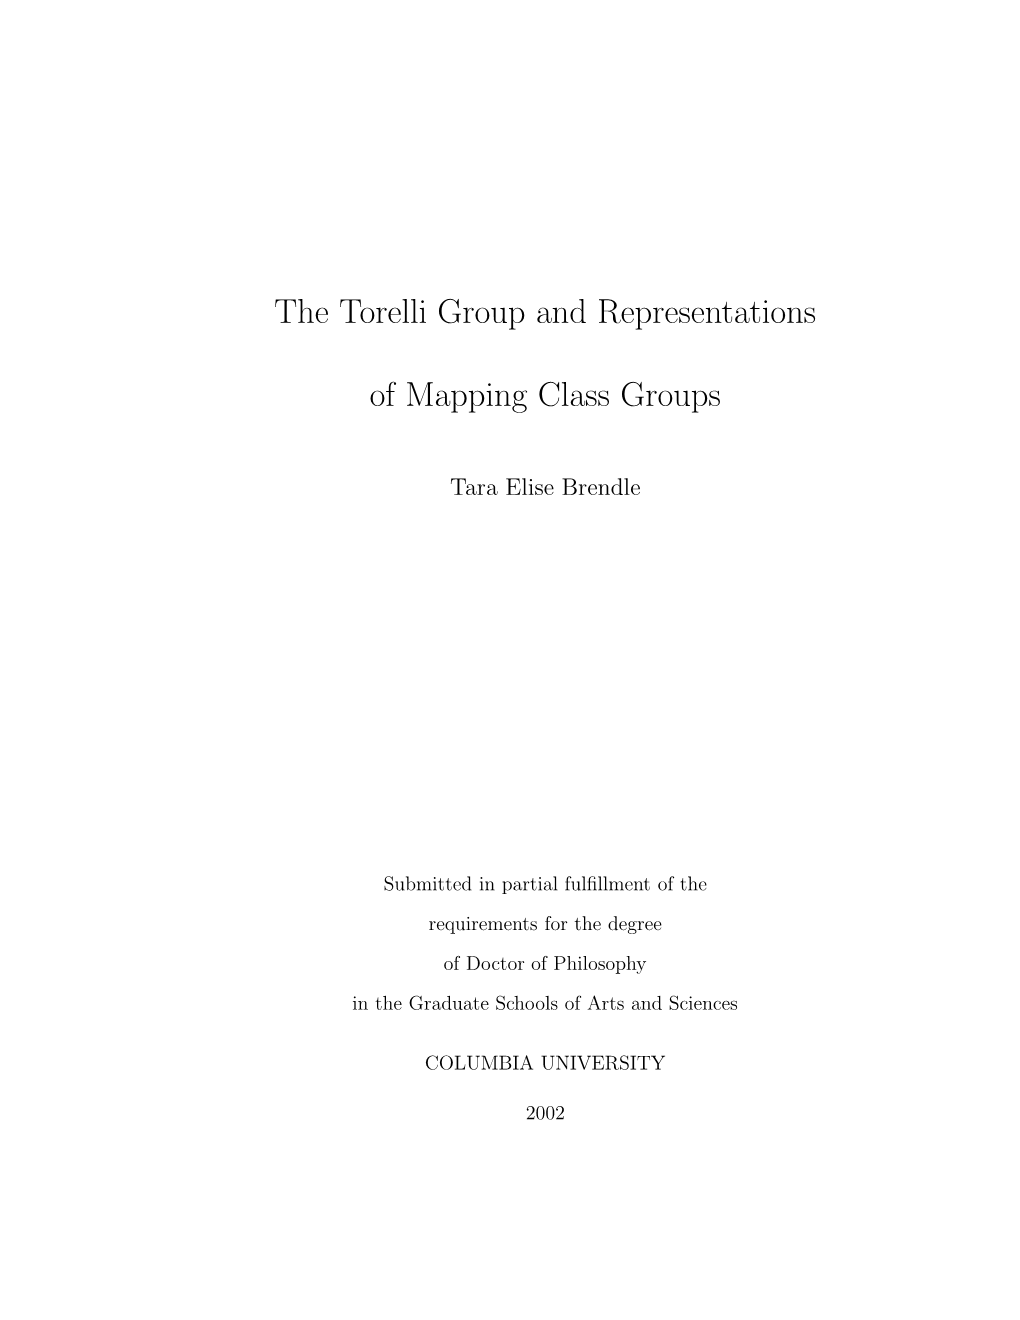 The Torelli Group and Representations of Mapping Class Groups